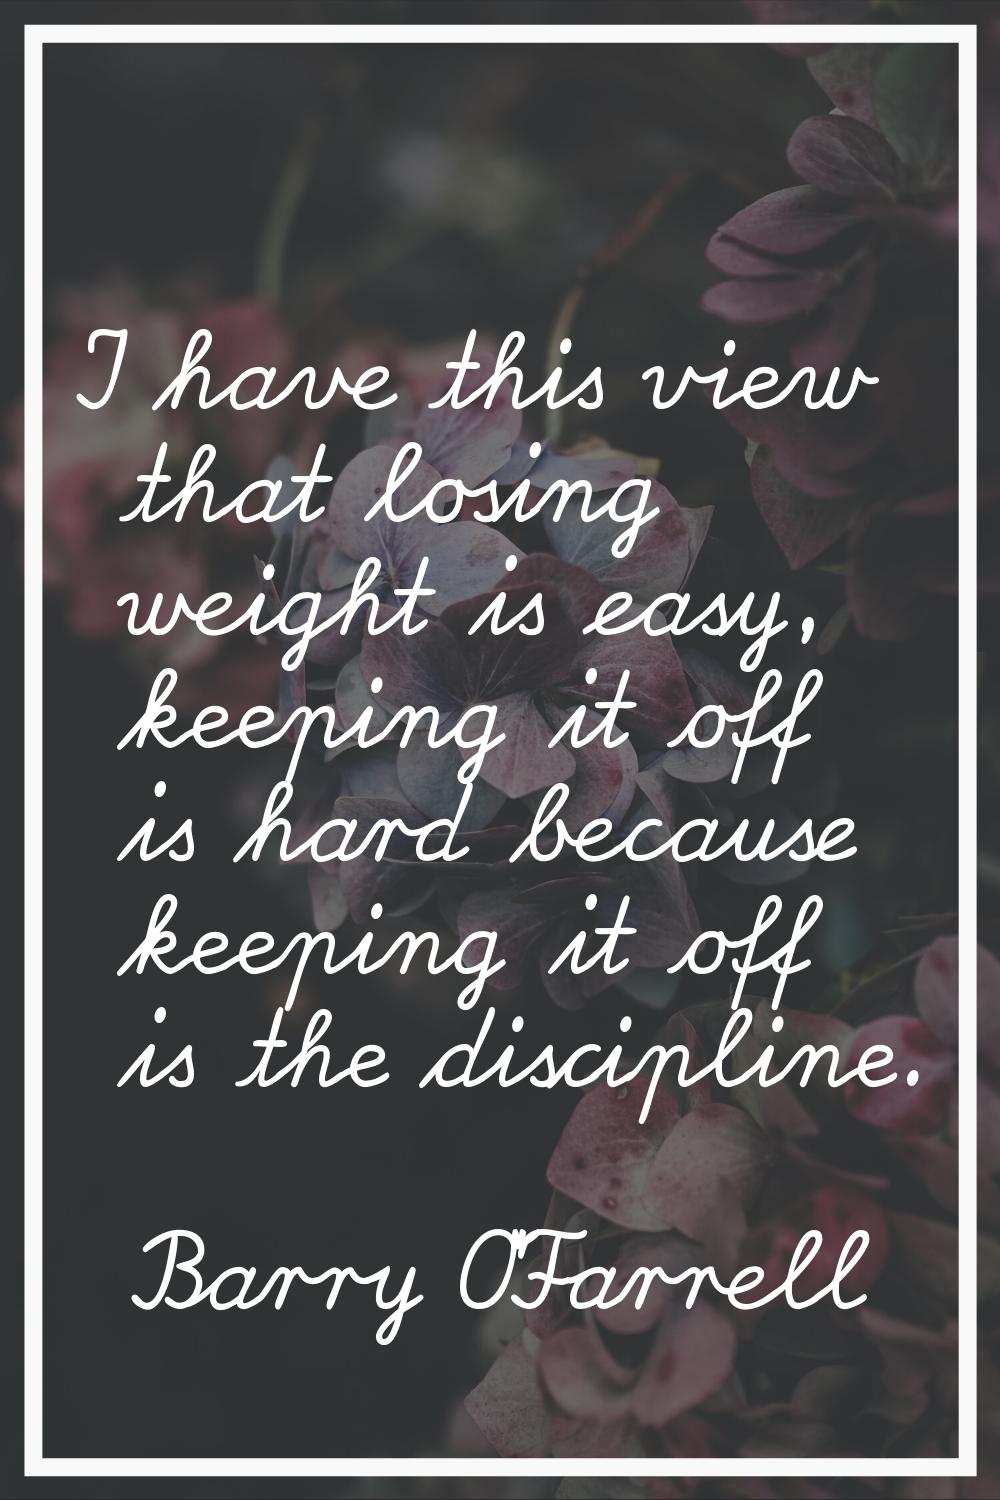 I have this view that losing weight is easy, keeping it off is hard because keeping it off is the d